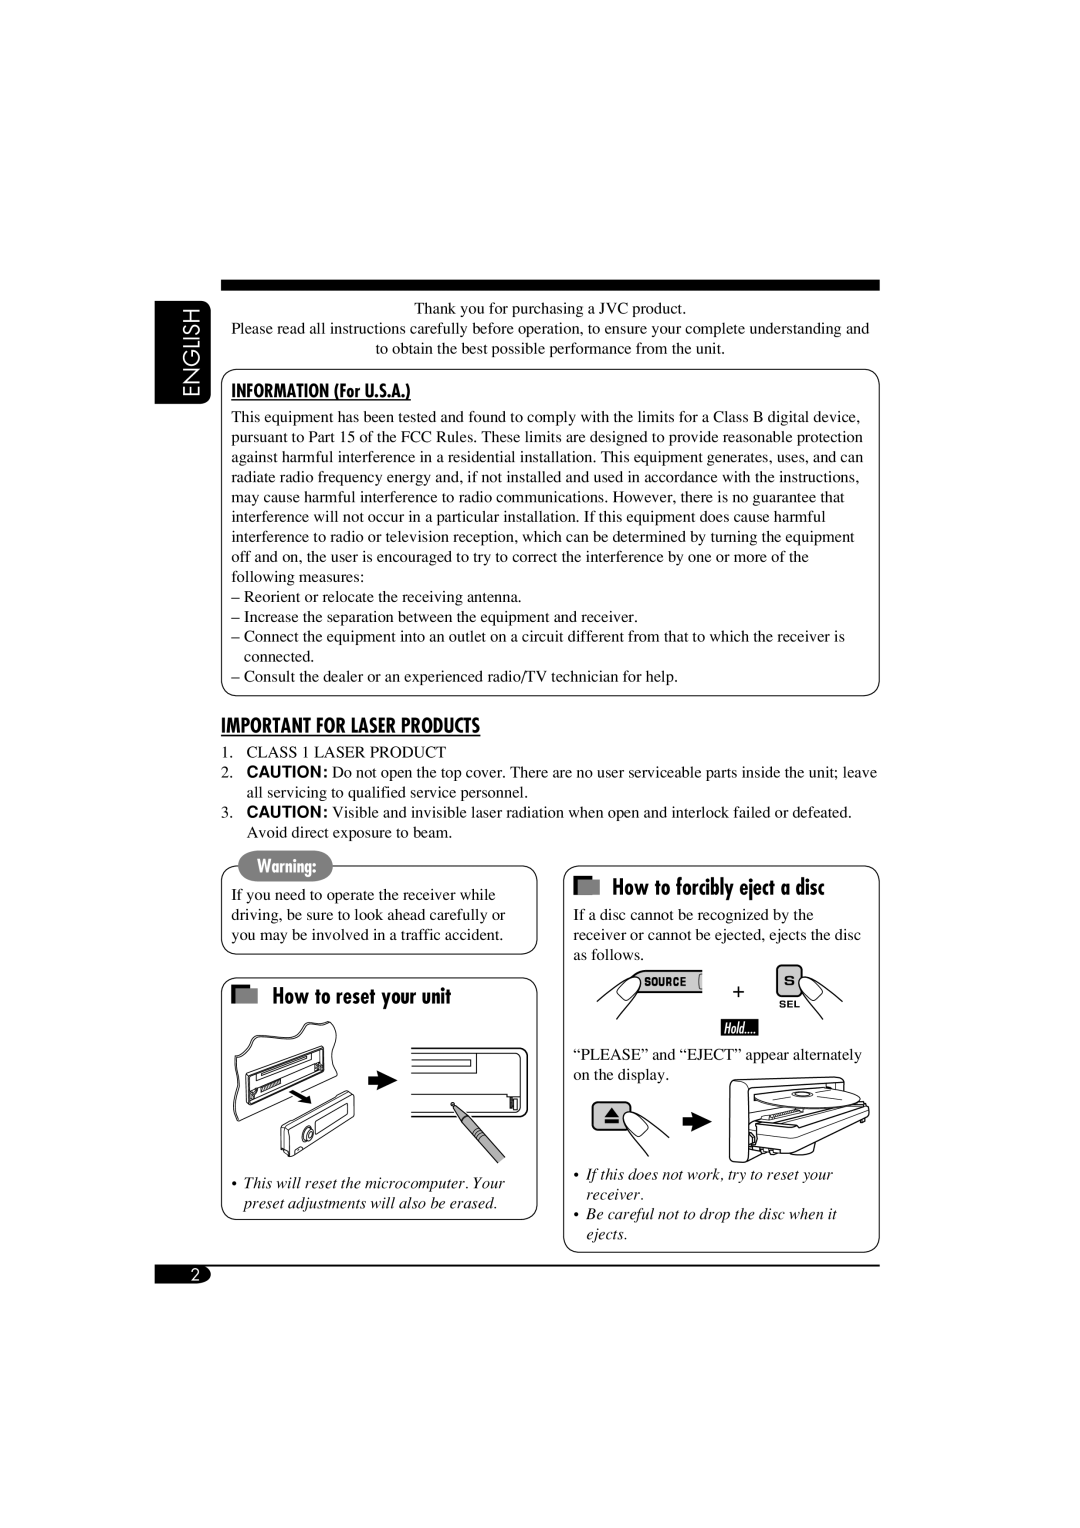 JVC KD-S51 manual English, How to forcibly eject a disc, How to reset your unit, Important For Laser Products 